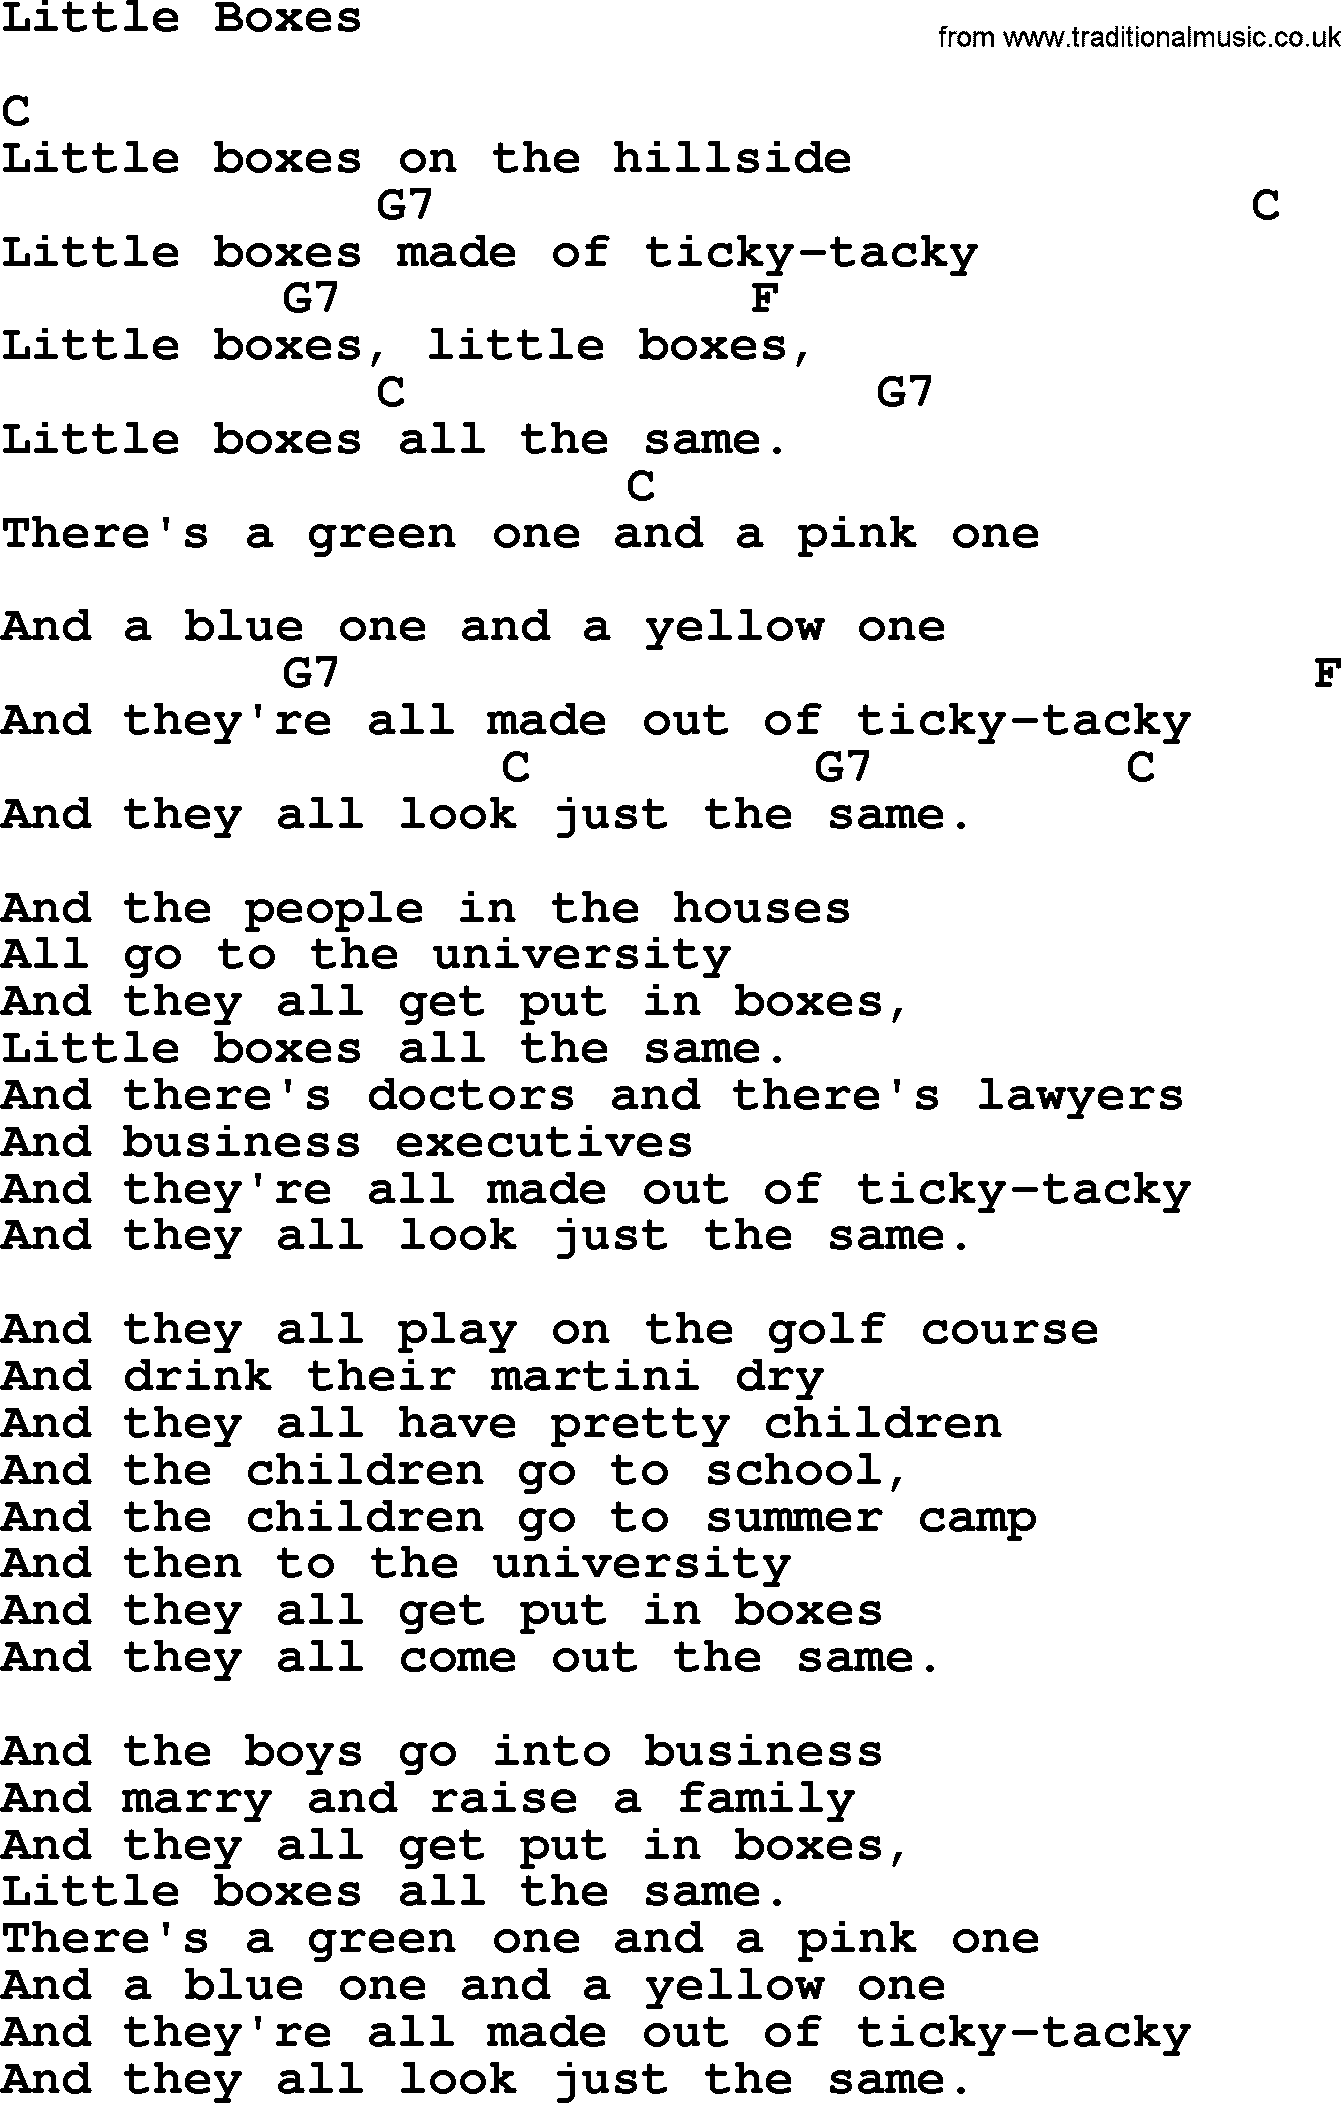 Pete Seeger song Little Boxes2, lyrics and chords